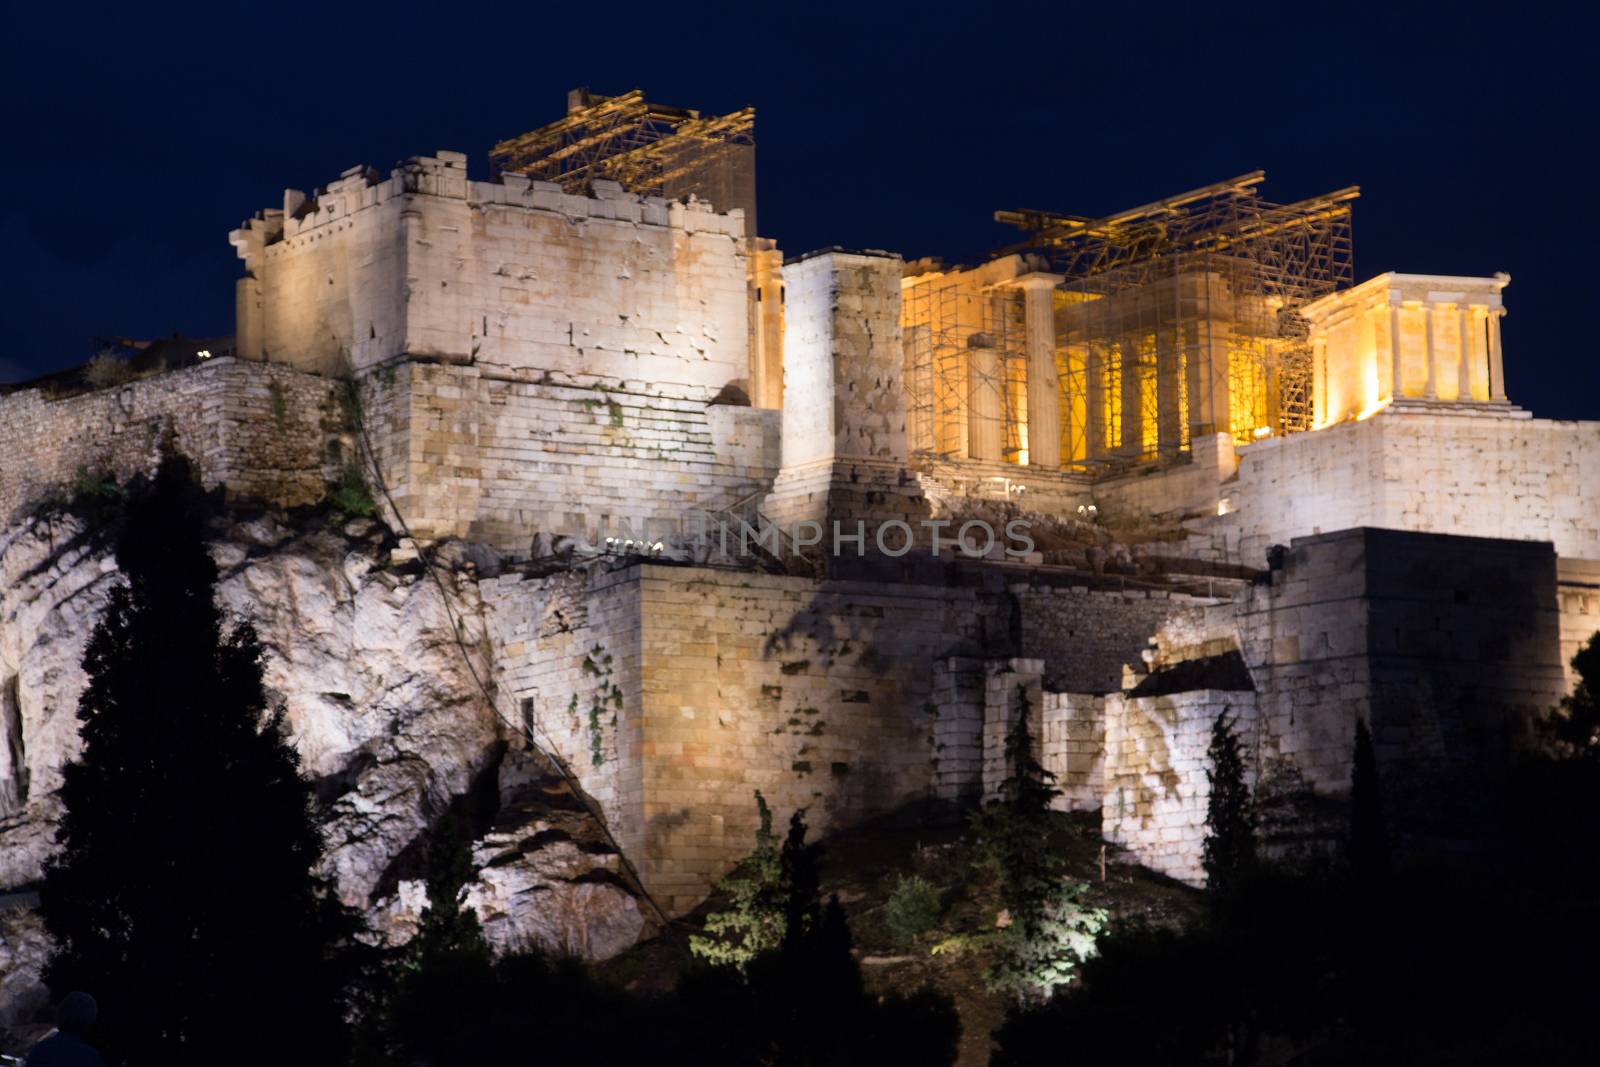 The Acropolis and Parthenon at night in Athens, Greece